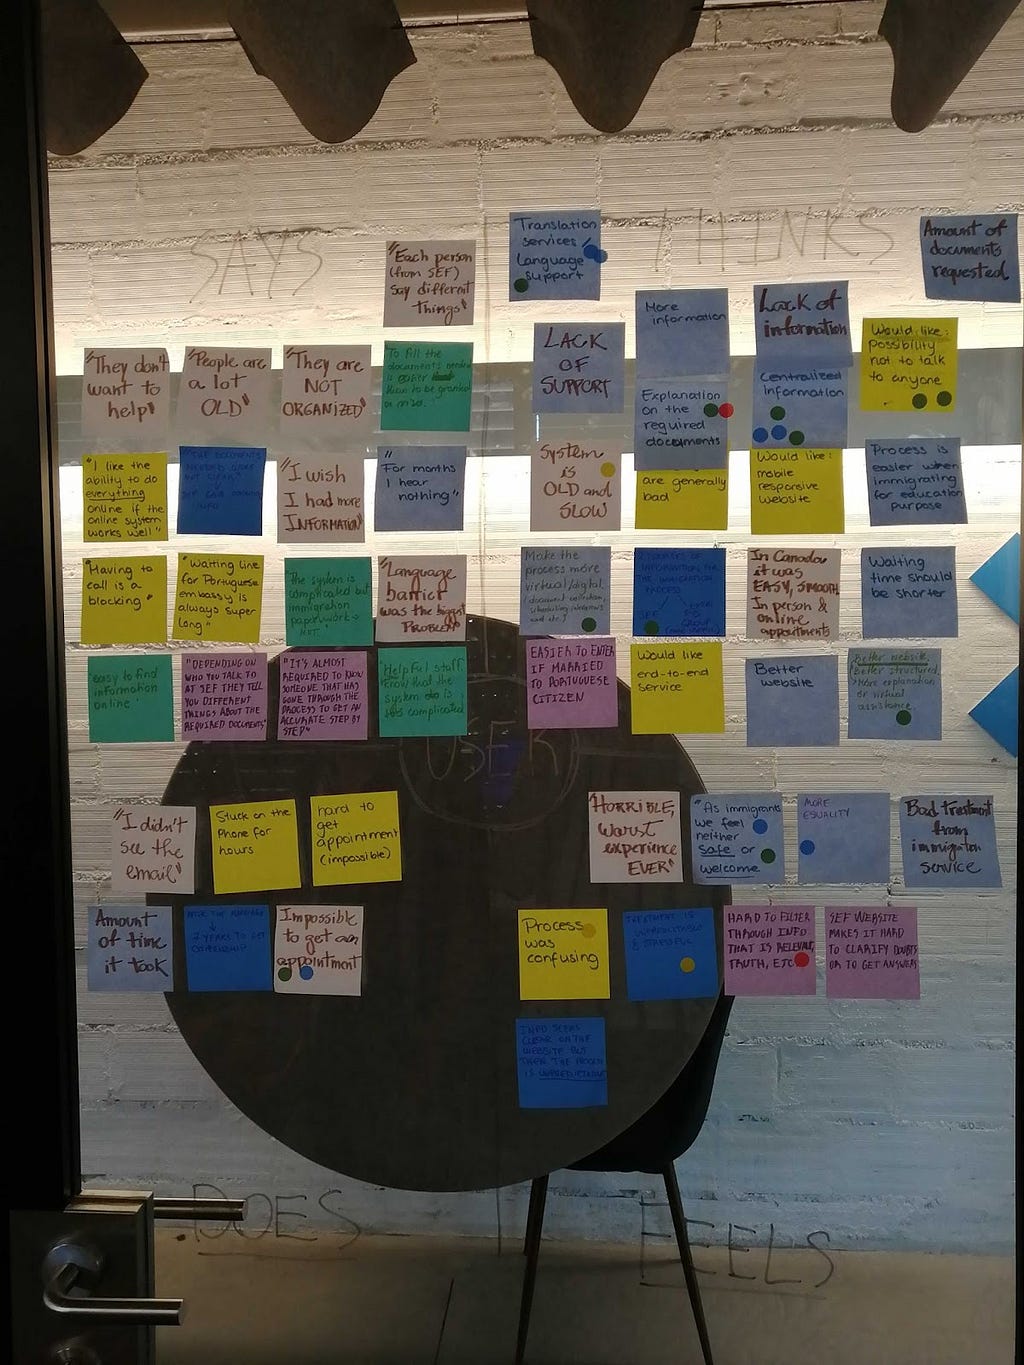 Empathy map with post-its organized